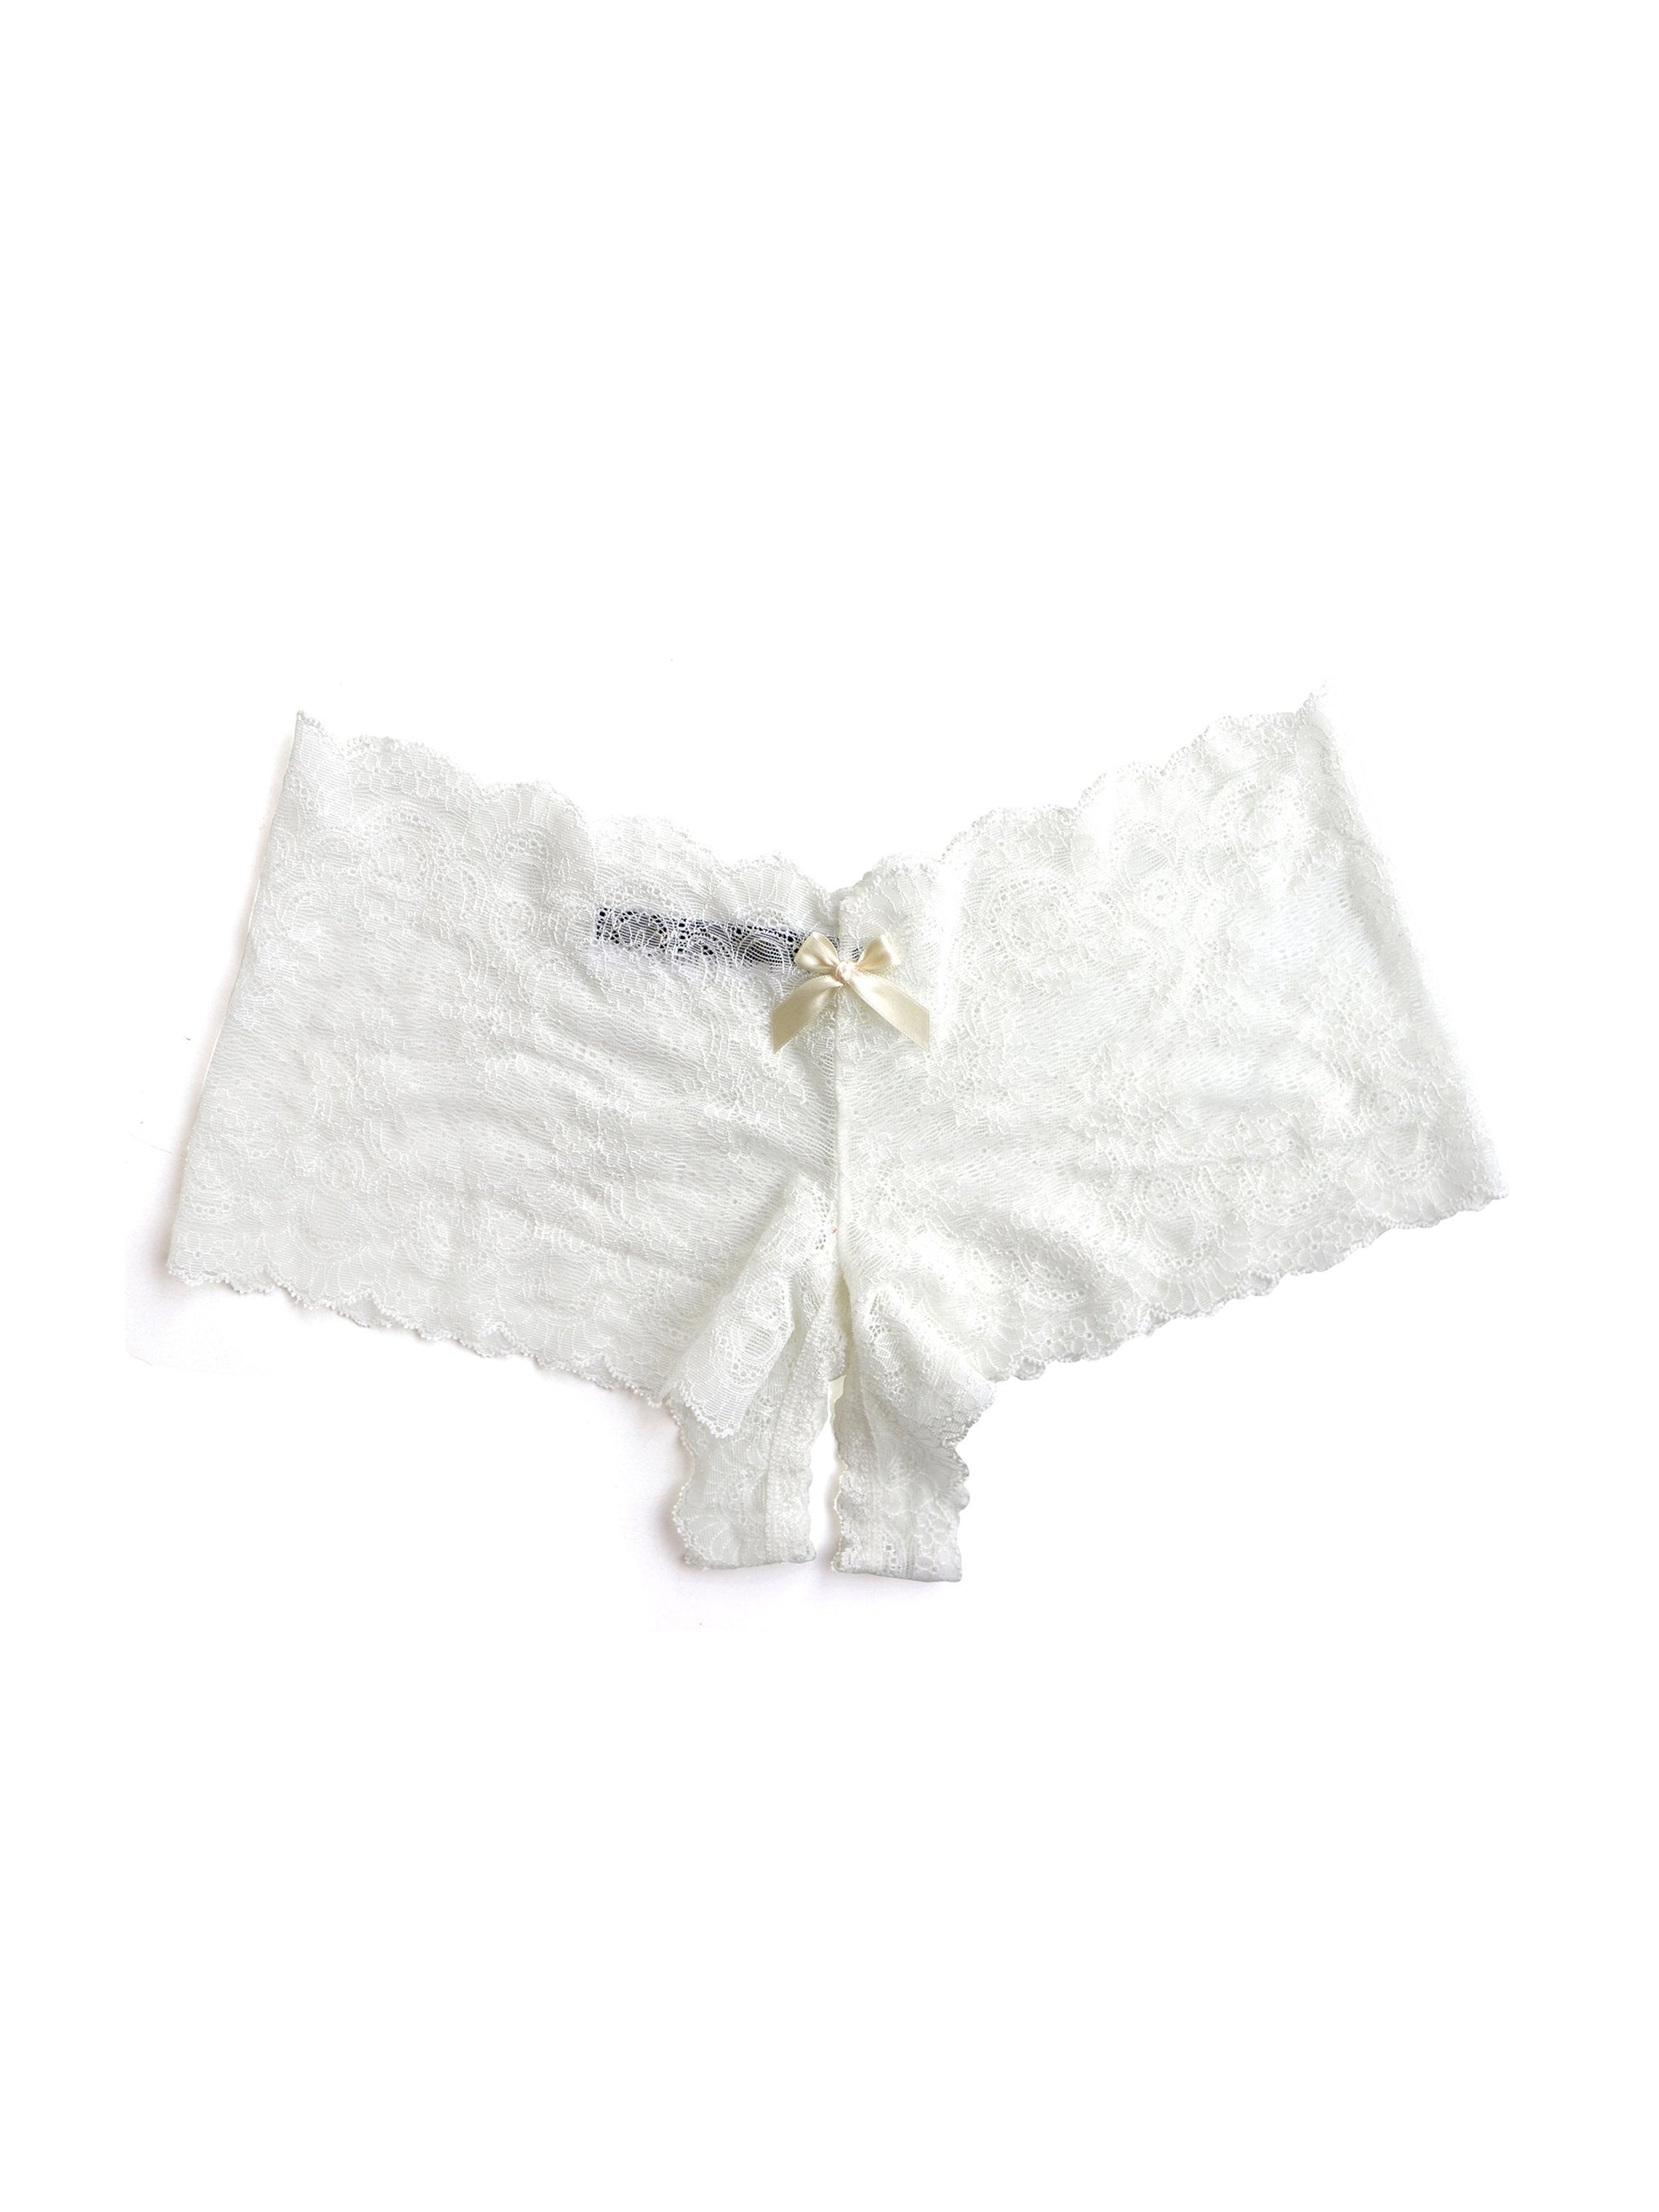 Luxe Lace Crotchless Brief See-Through Ivory White, Hanky Panky